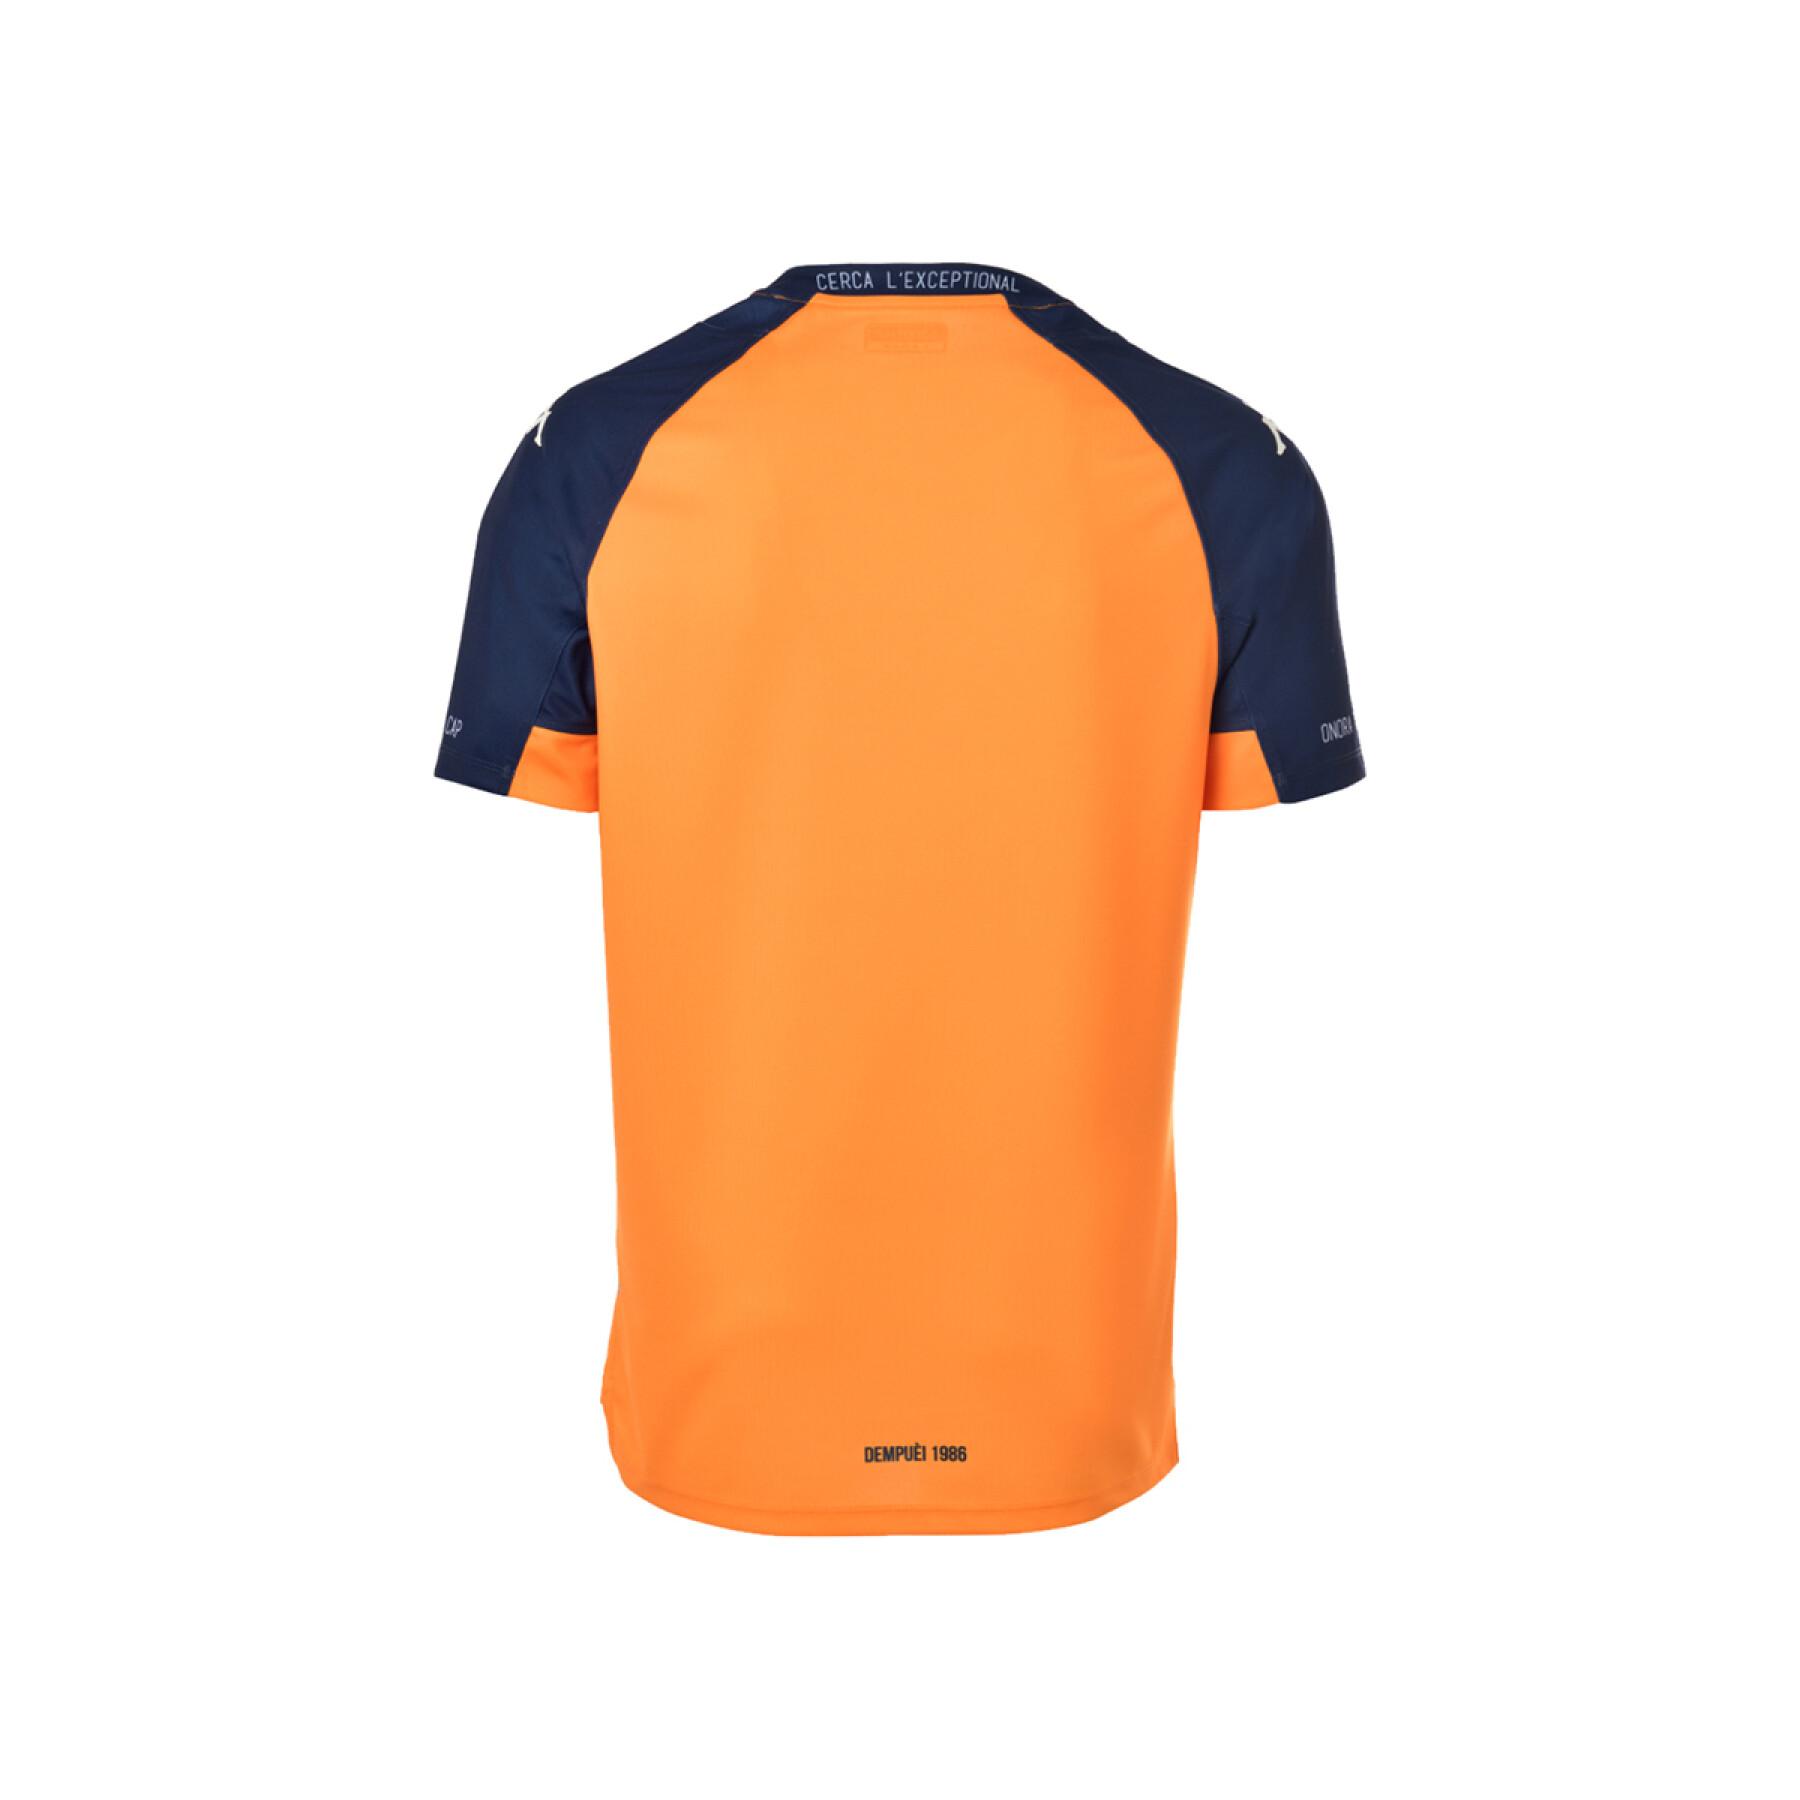 Terza maglia Montpellier Hérault Rugby 2019/20